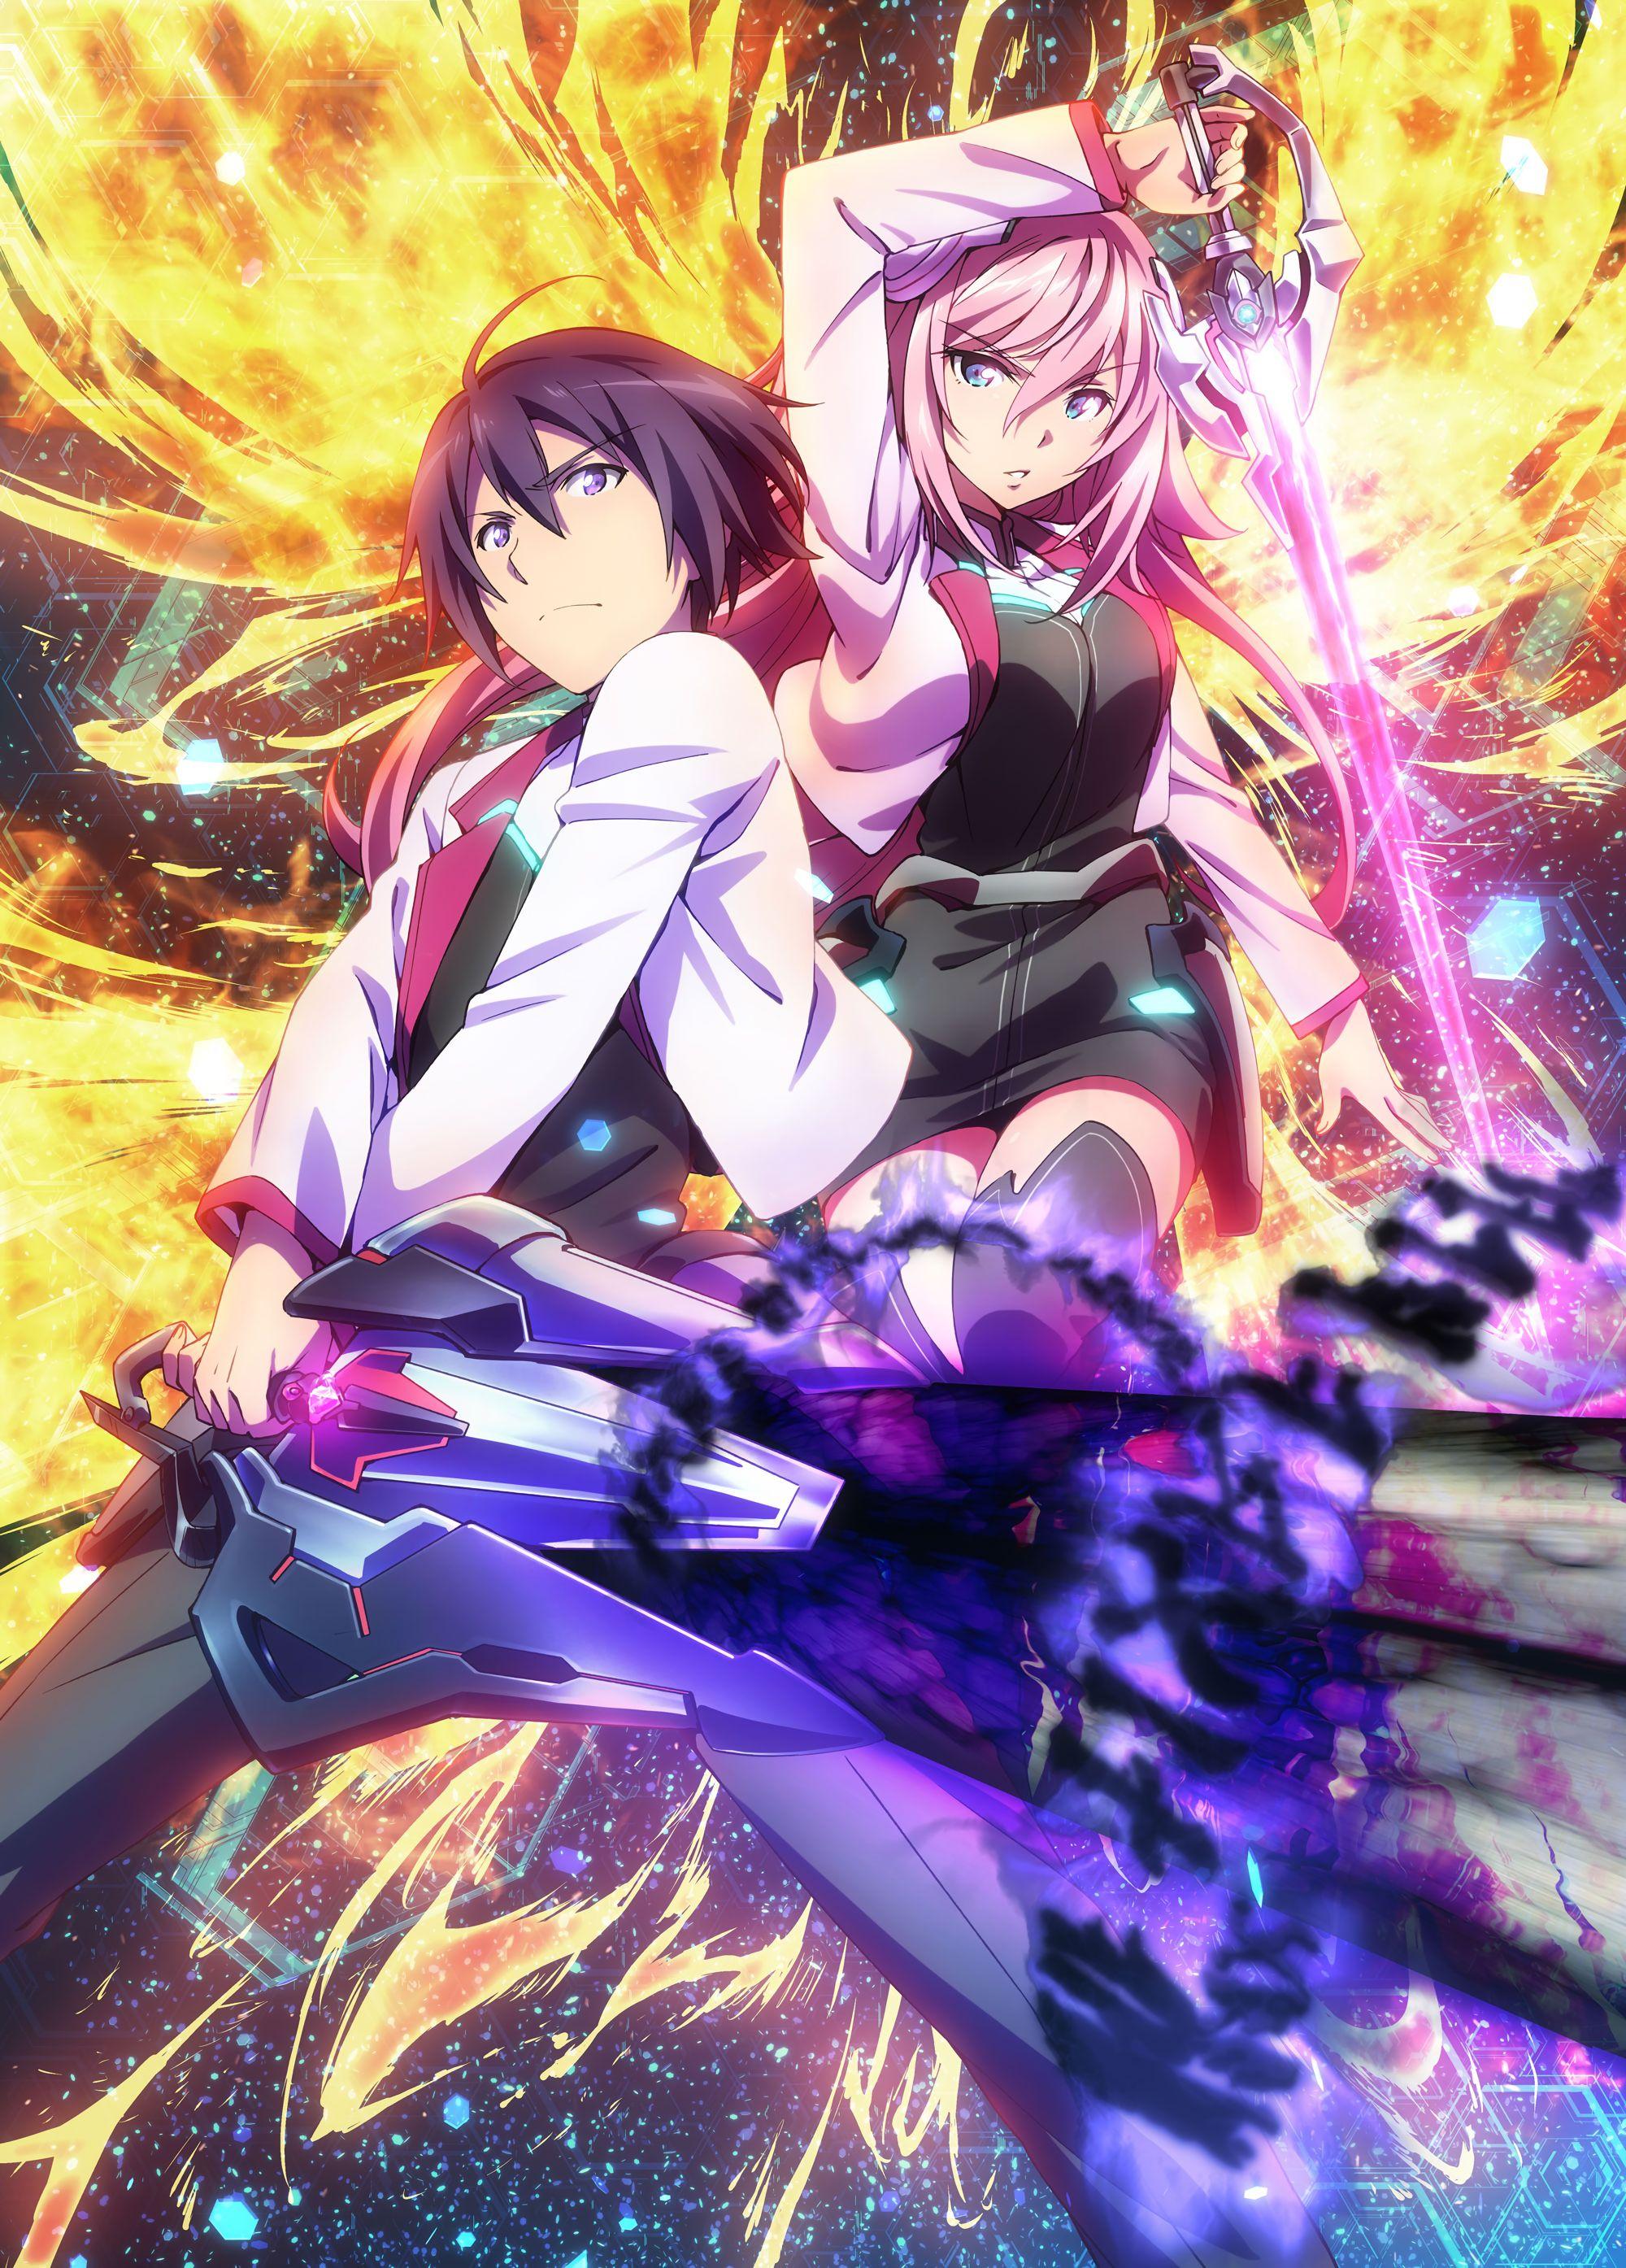 The Asterisk War: The Academy City On The Water Wallpapers